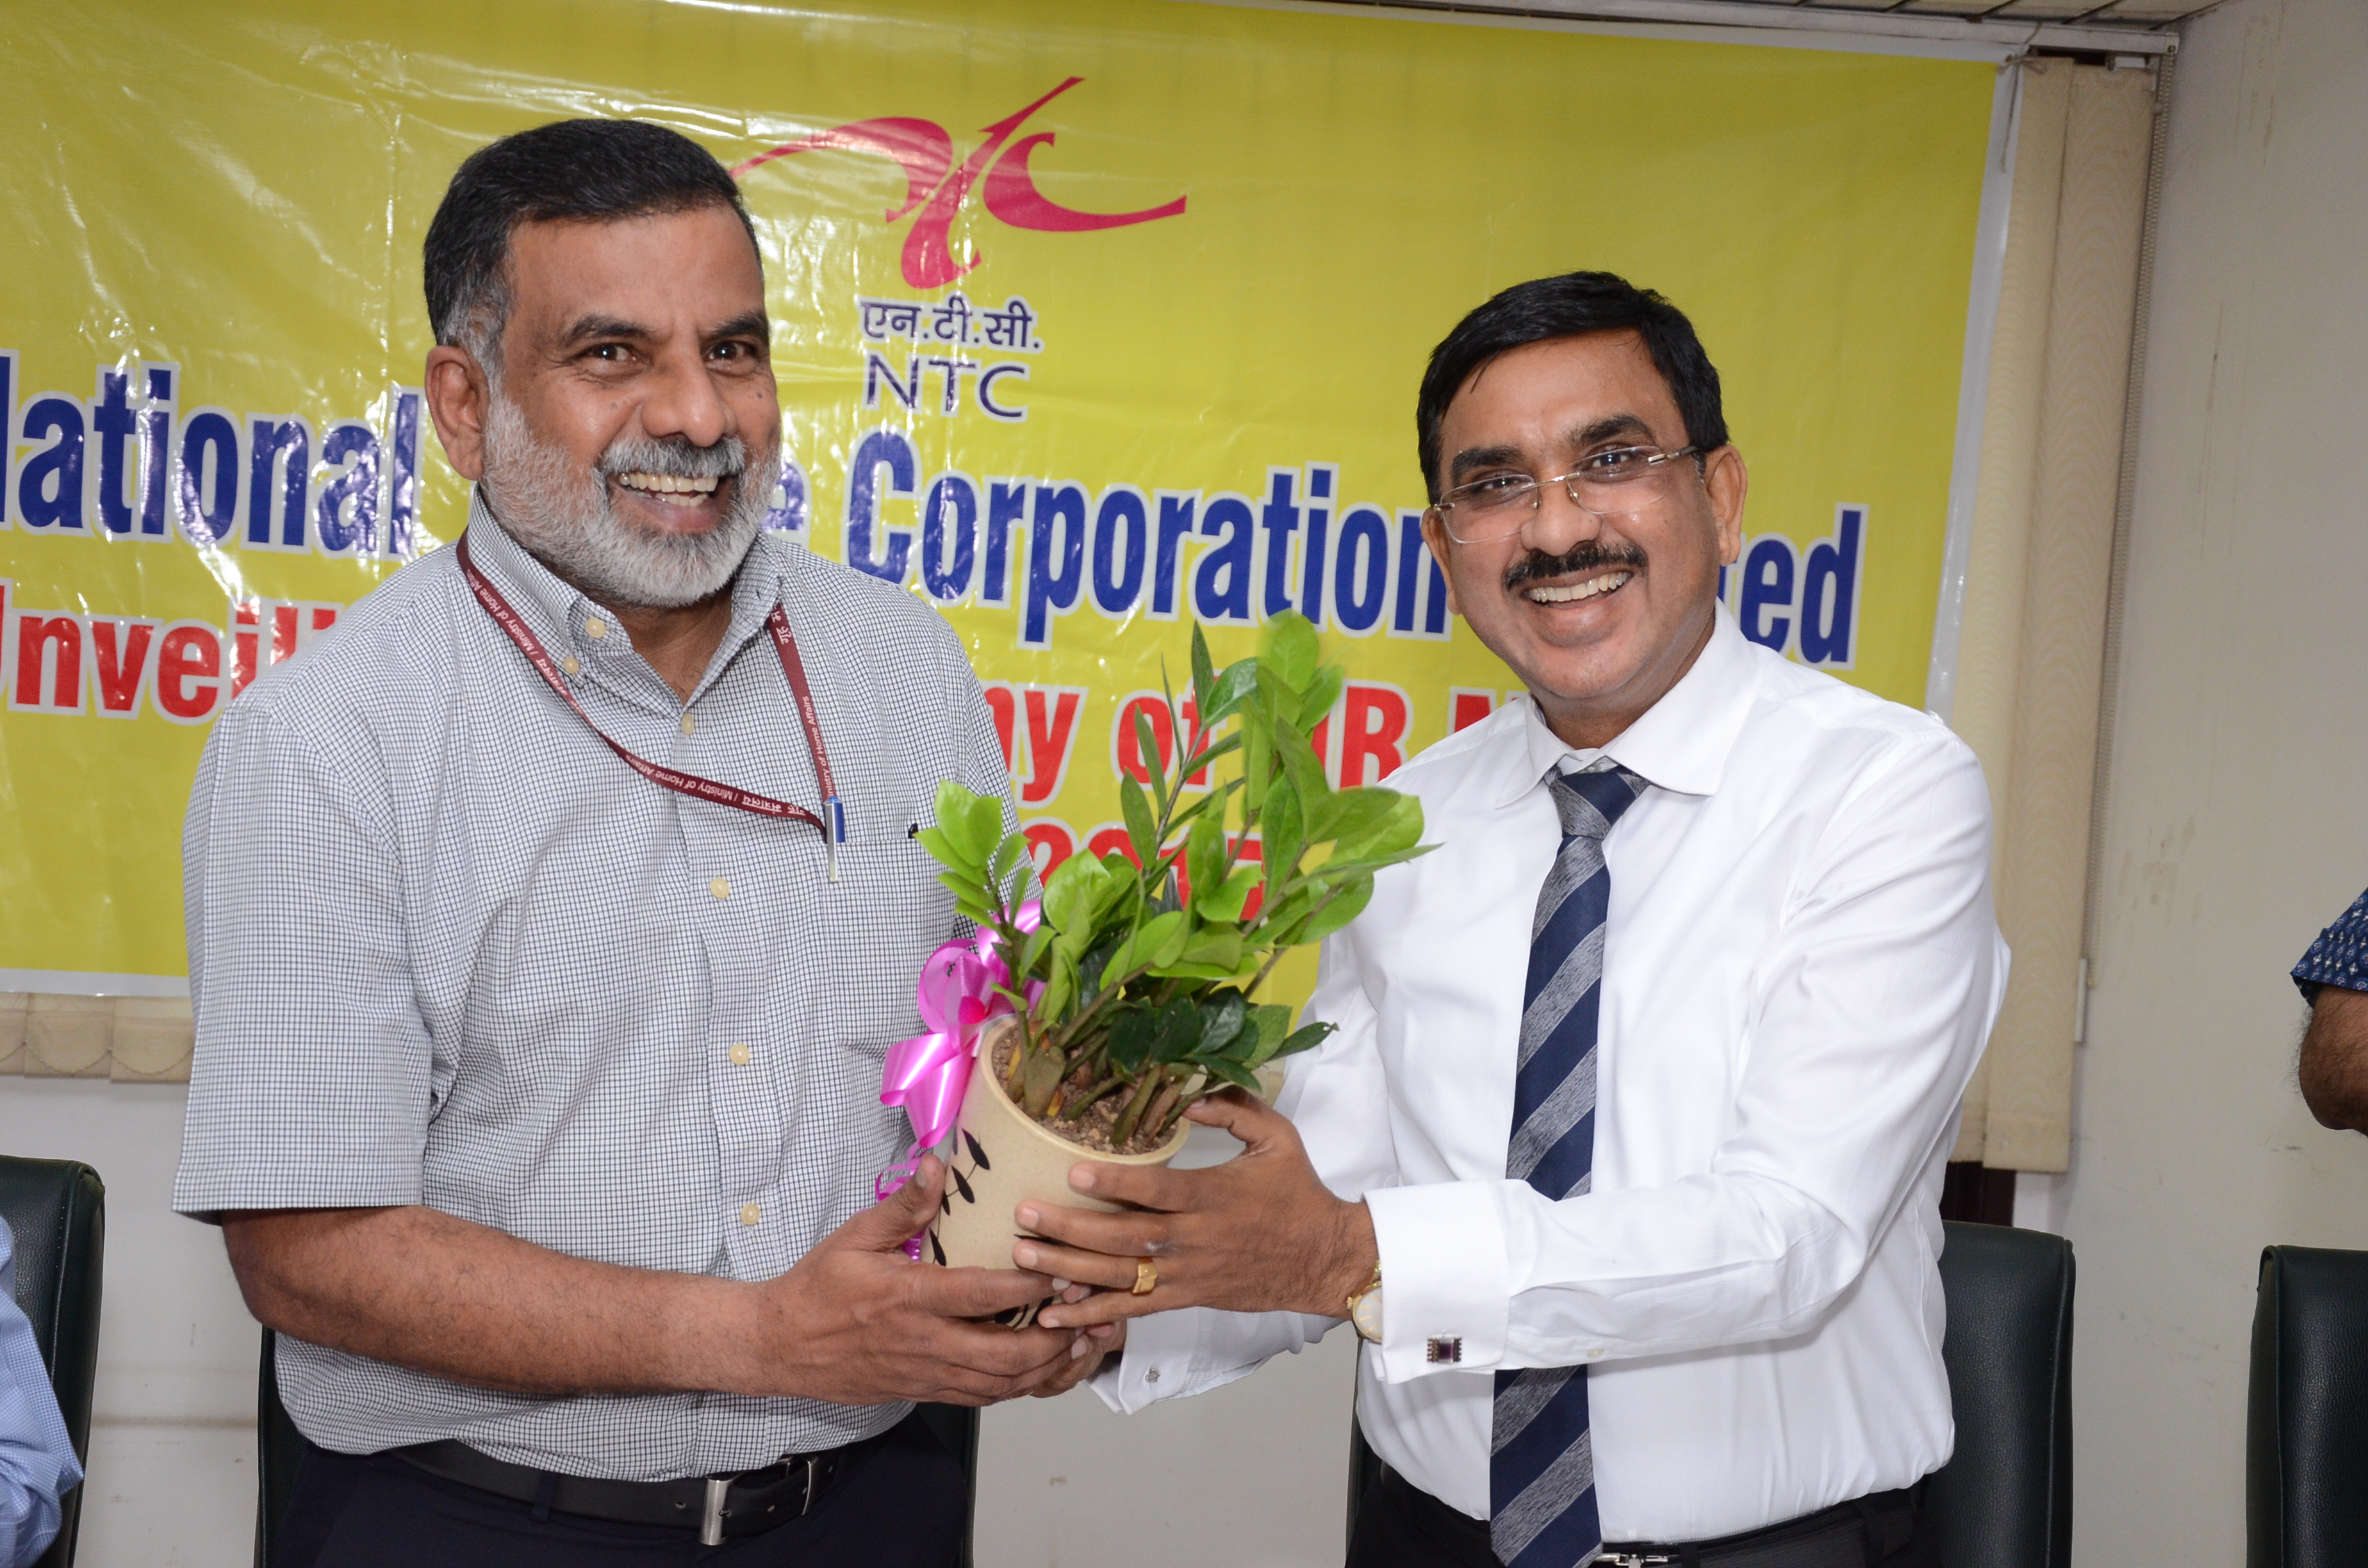 Shri P. C. Vaish, Chairman and Managing Dierctor NTCL, welcoming to Honorable Shri A. Madhukumar Reddy, Joint Secretary of Ministry Of Textiles on the occasion of Unveiling Ceremony Of HR Manual.